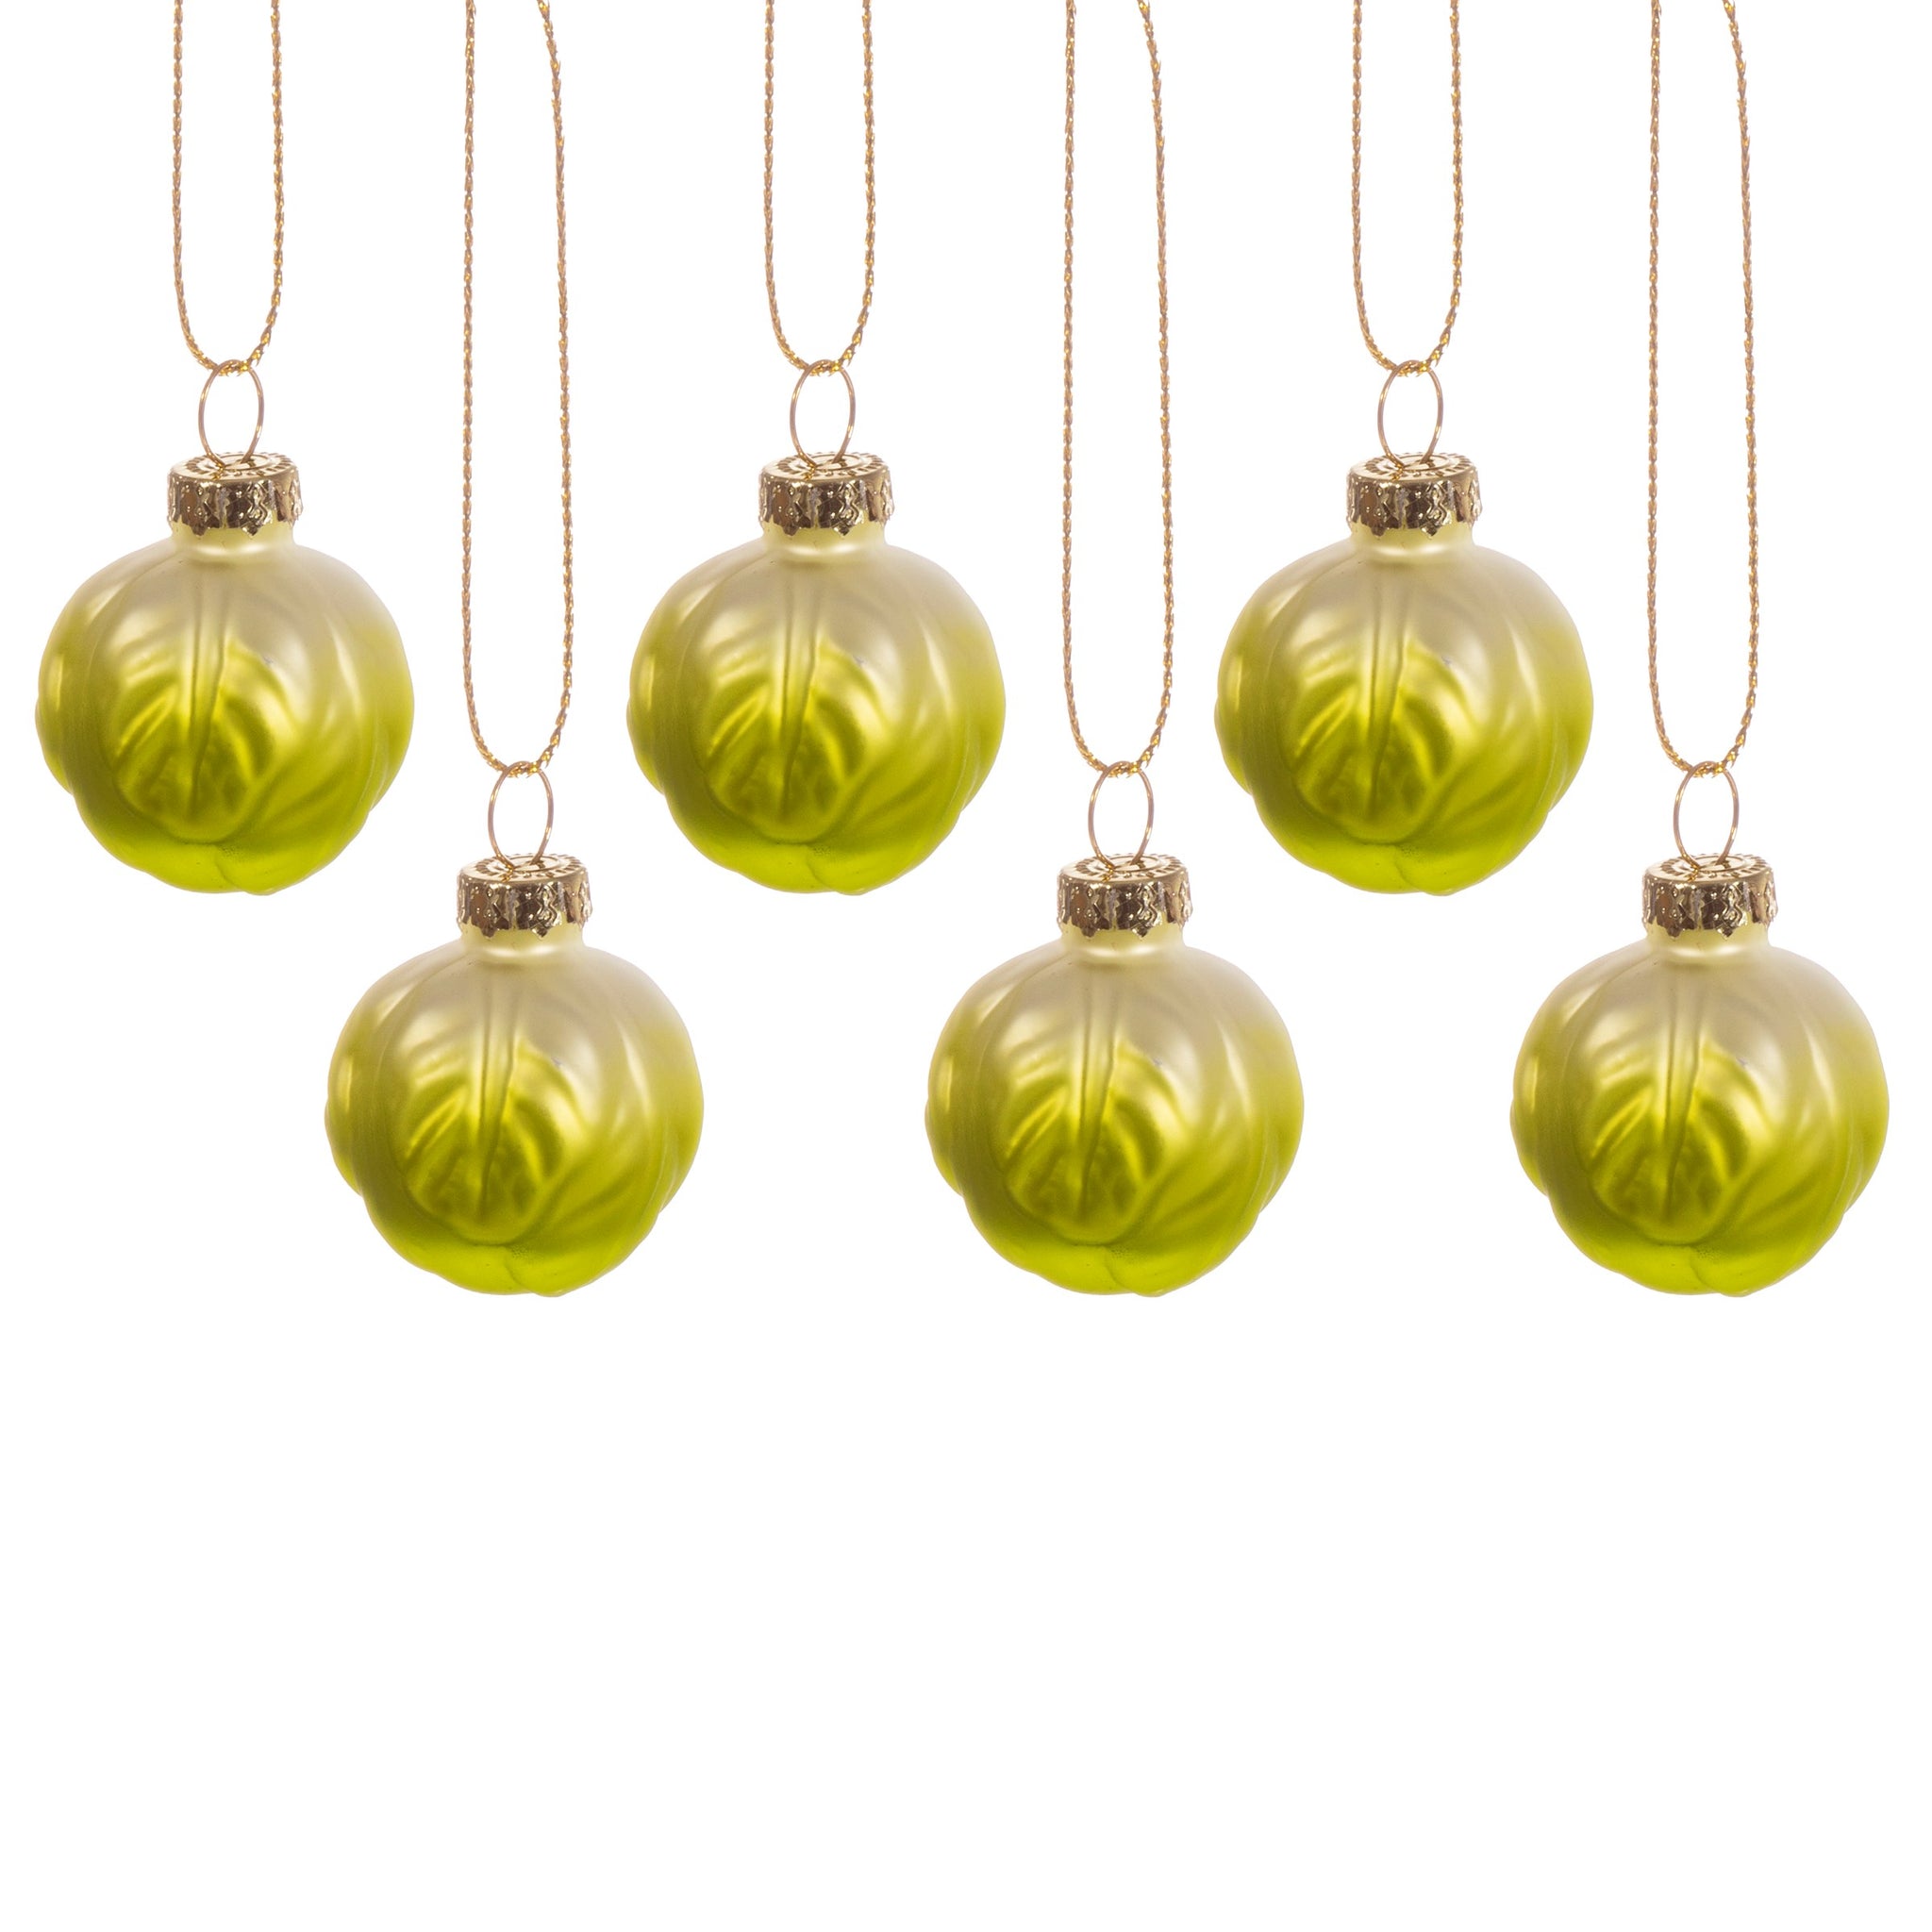 Brussel Sprouts Baubles set of 6